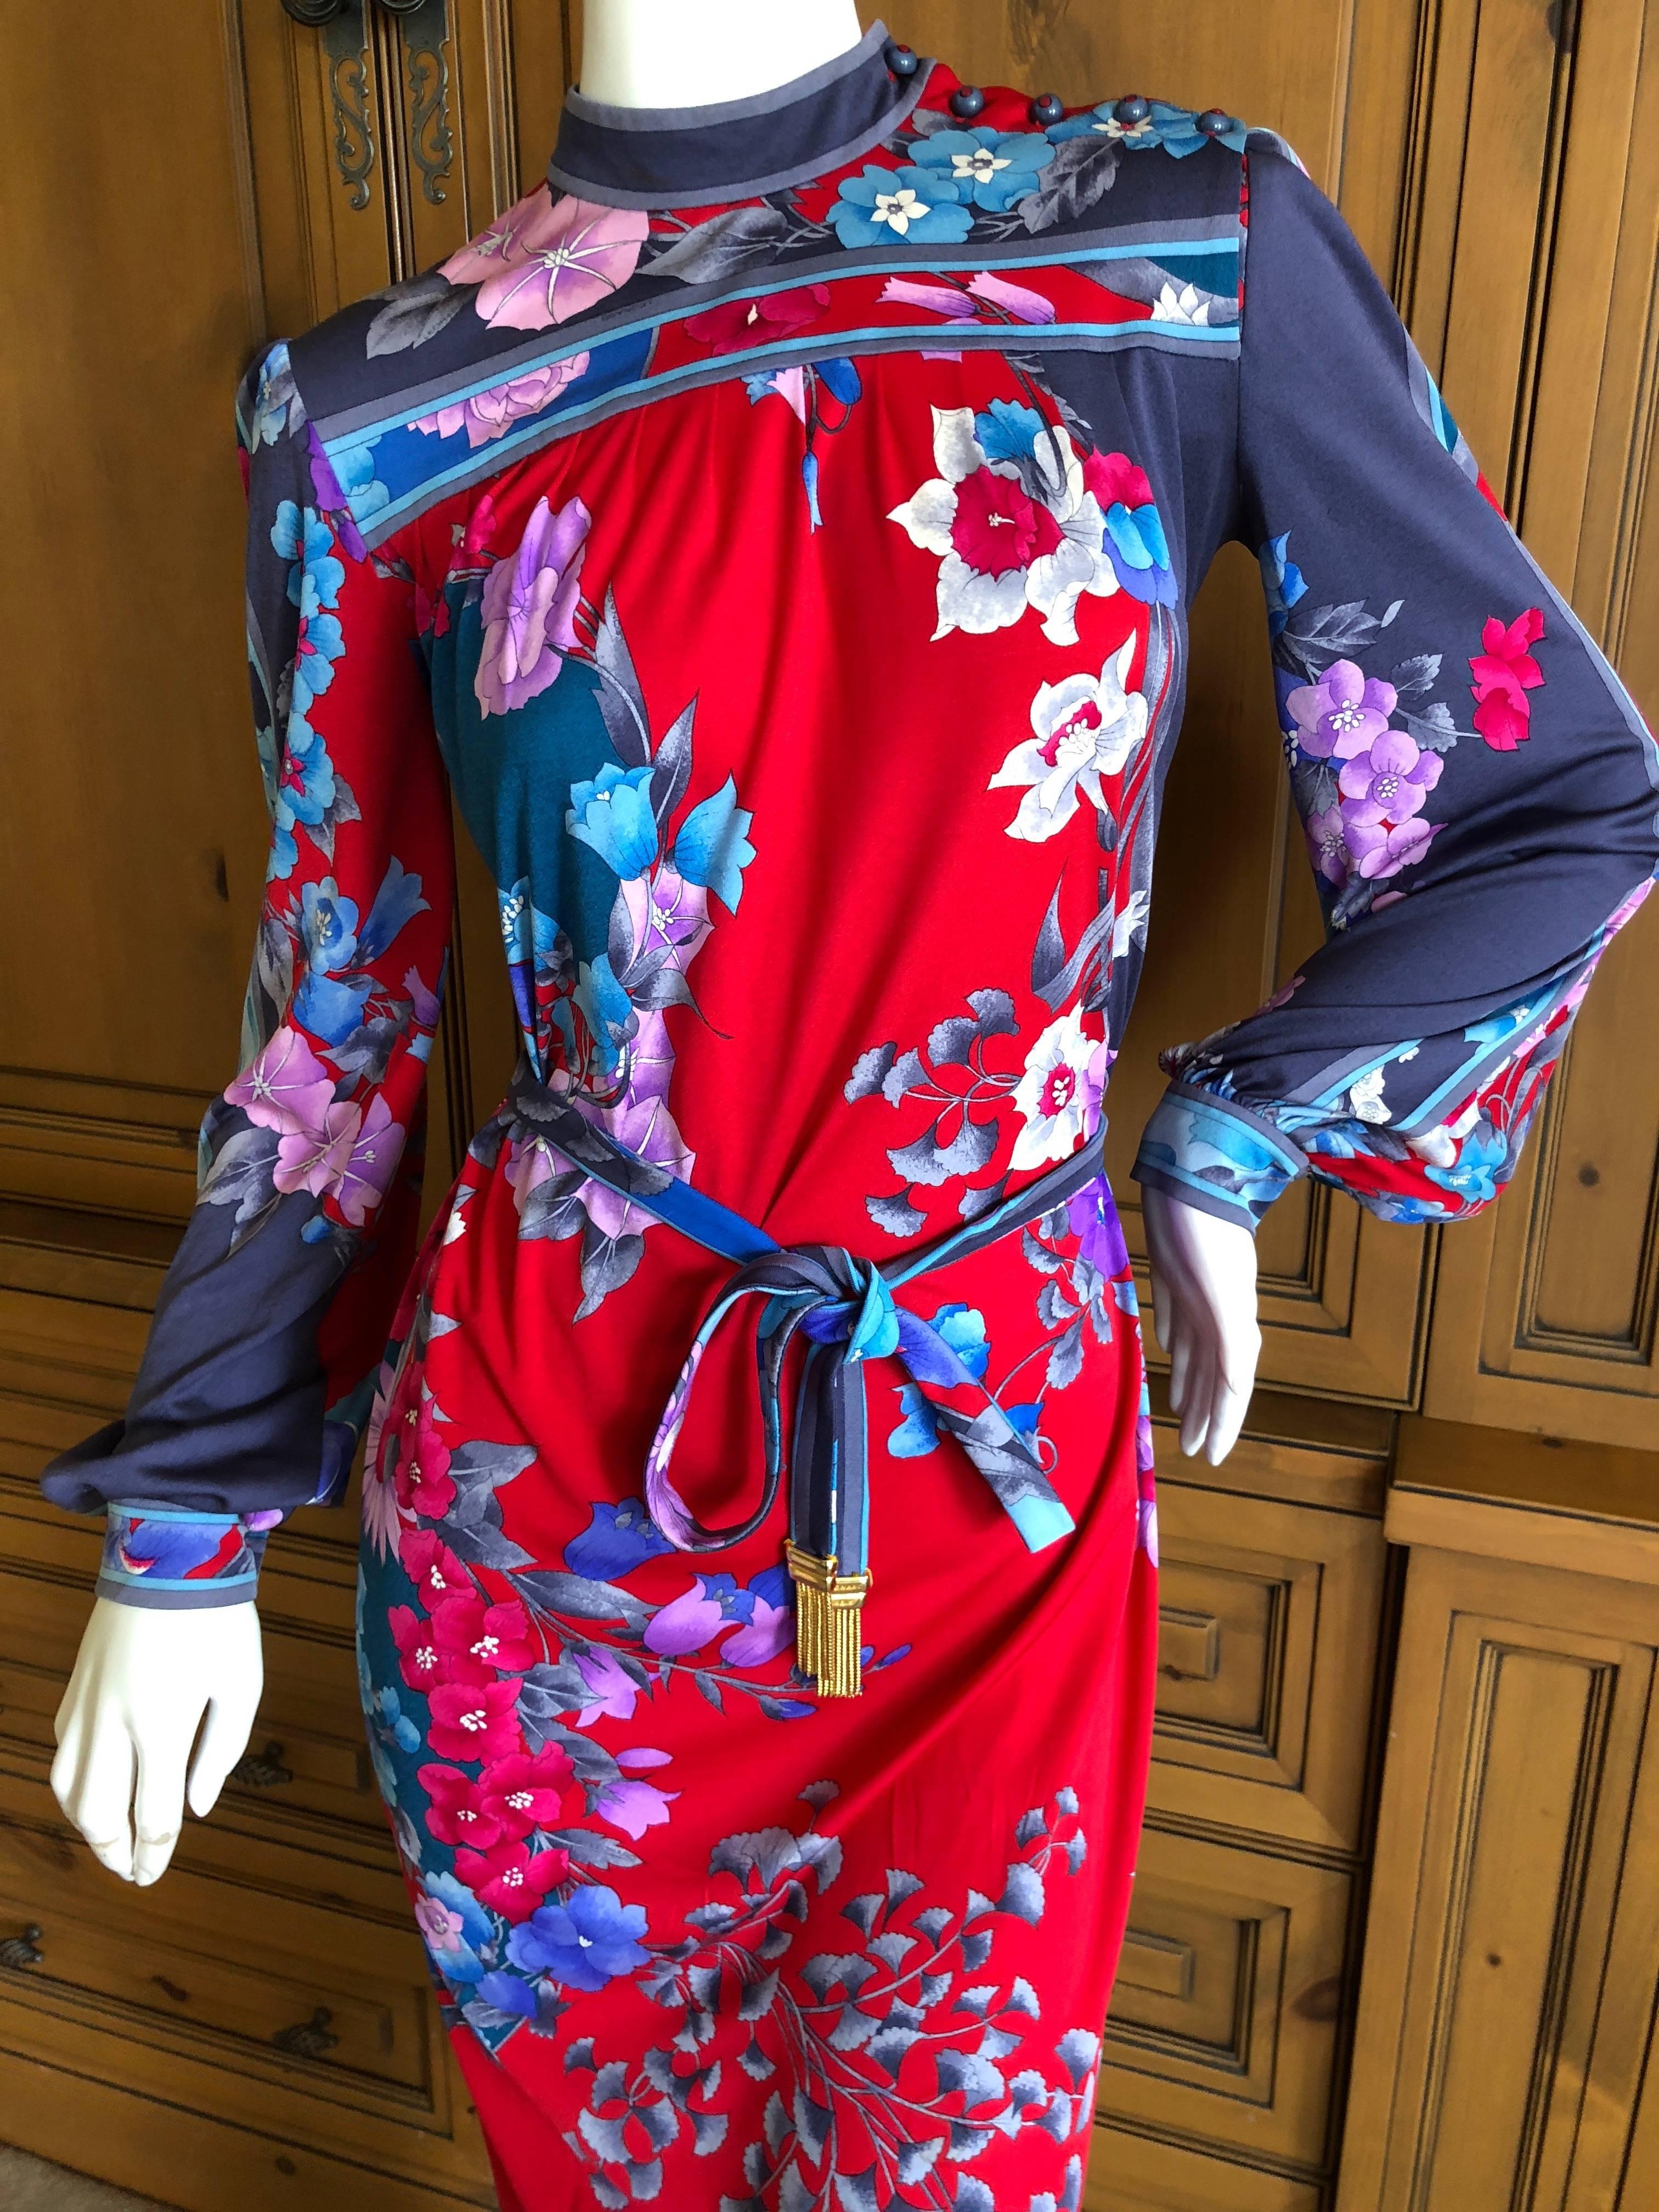 Leonard Paris Colorful 1970's Floral Silk Jersey Poet Sleeve Dress with Belt
Leonard , Paris was a contemporary of Pucci, using silk jersey printed in their signature florals, Leonard was as expensive, if not more, than Pucci.
 Featuring a mock